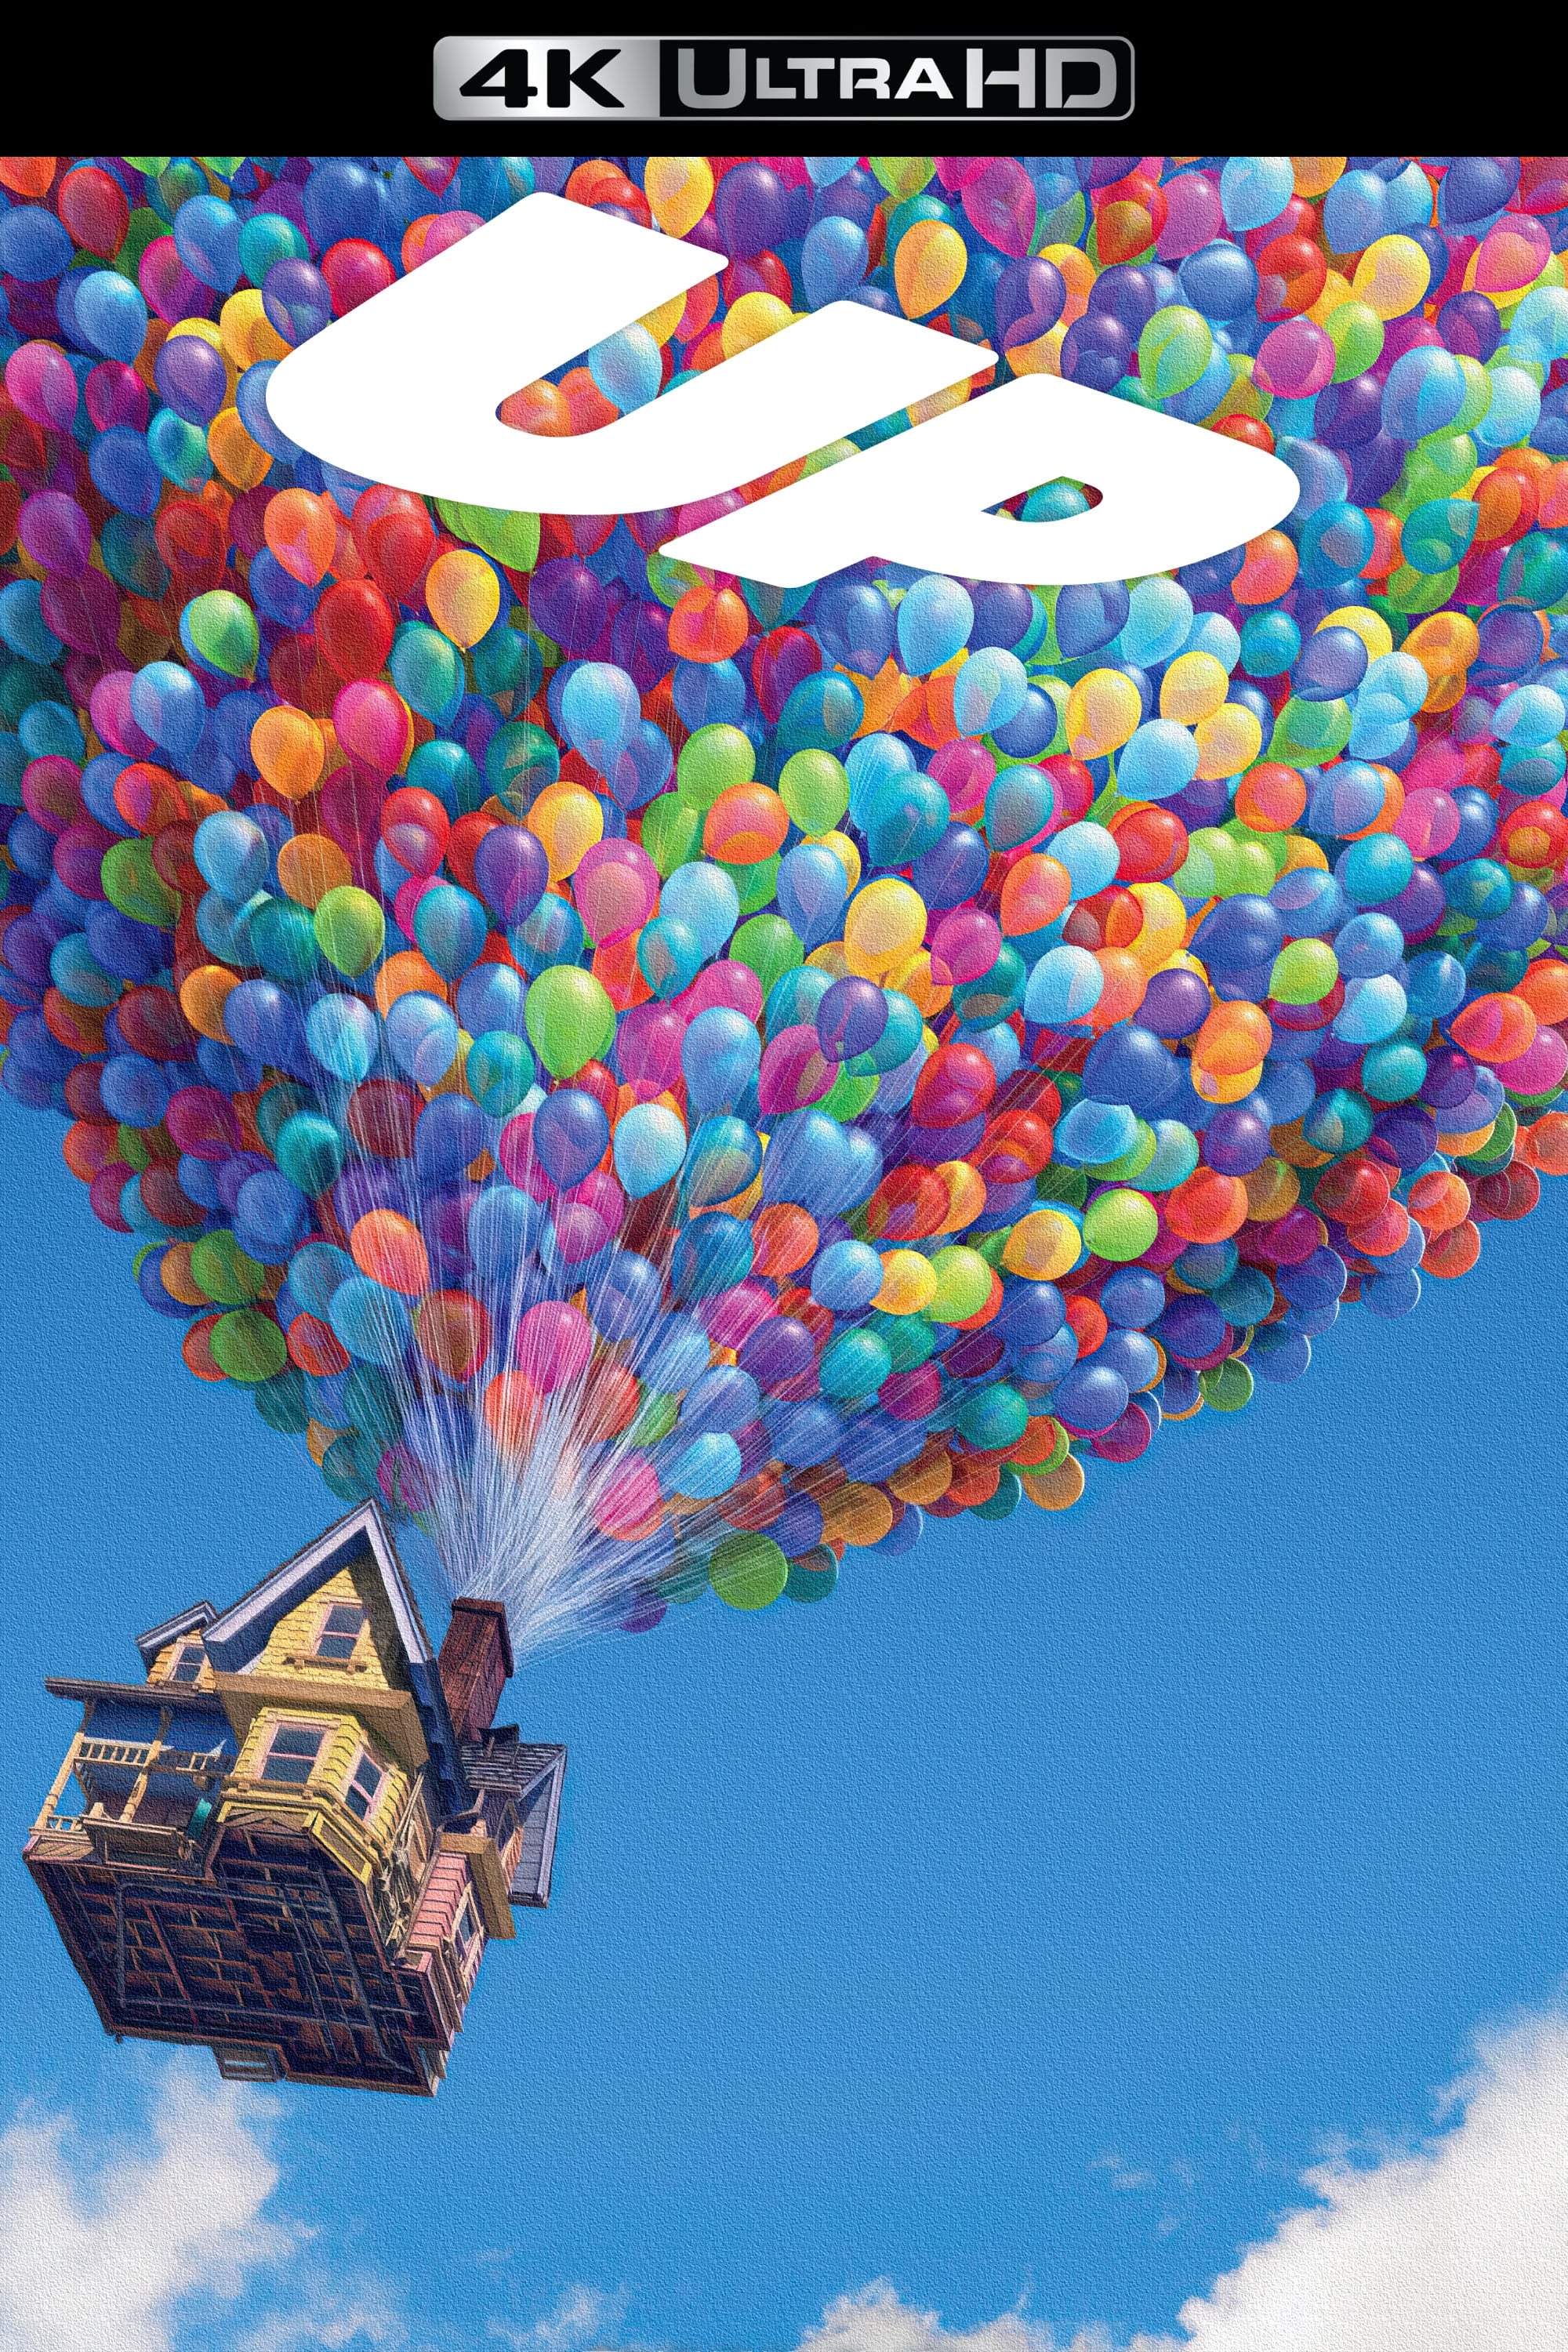 Up POSTER